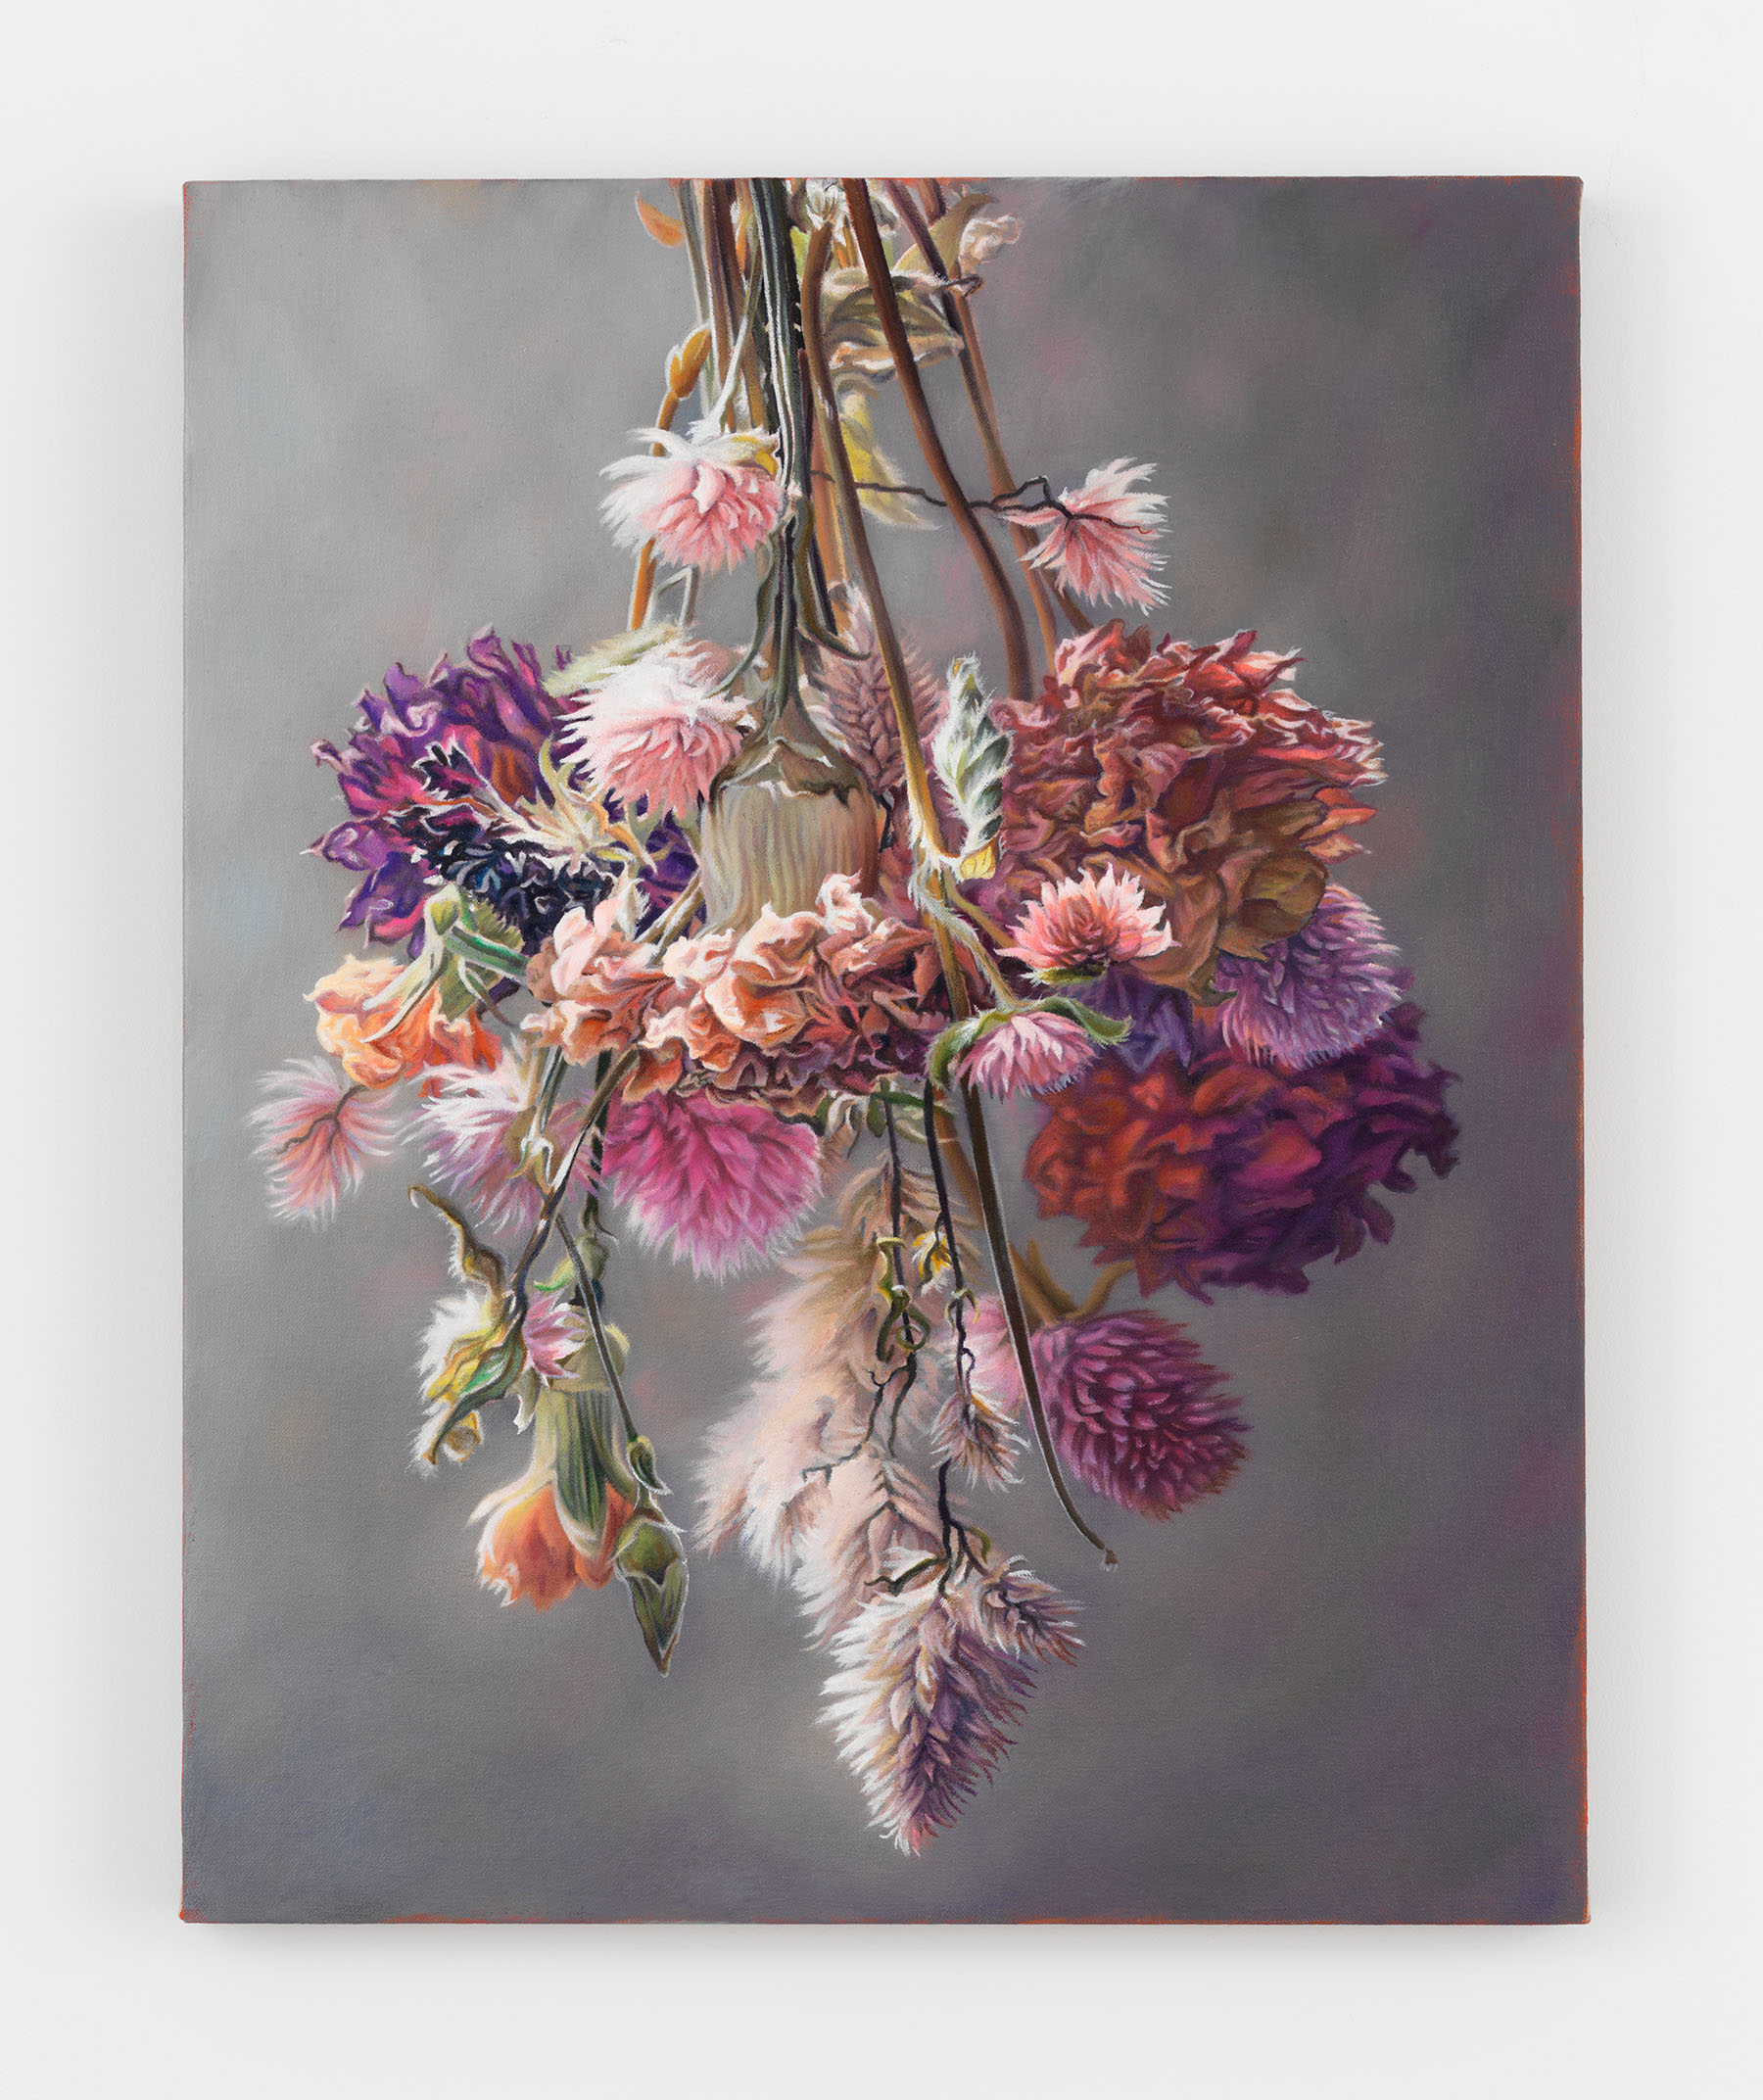 Chason Matthams, Dried Flowers (grey), 2020, Oil on linen over panel, 20 x 16 in.